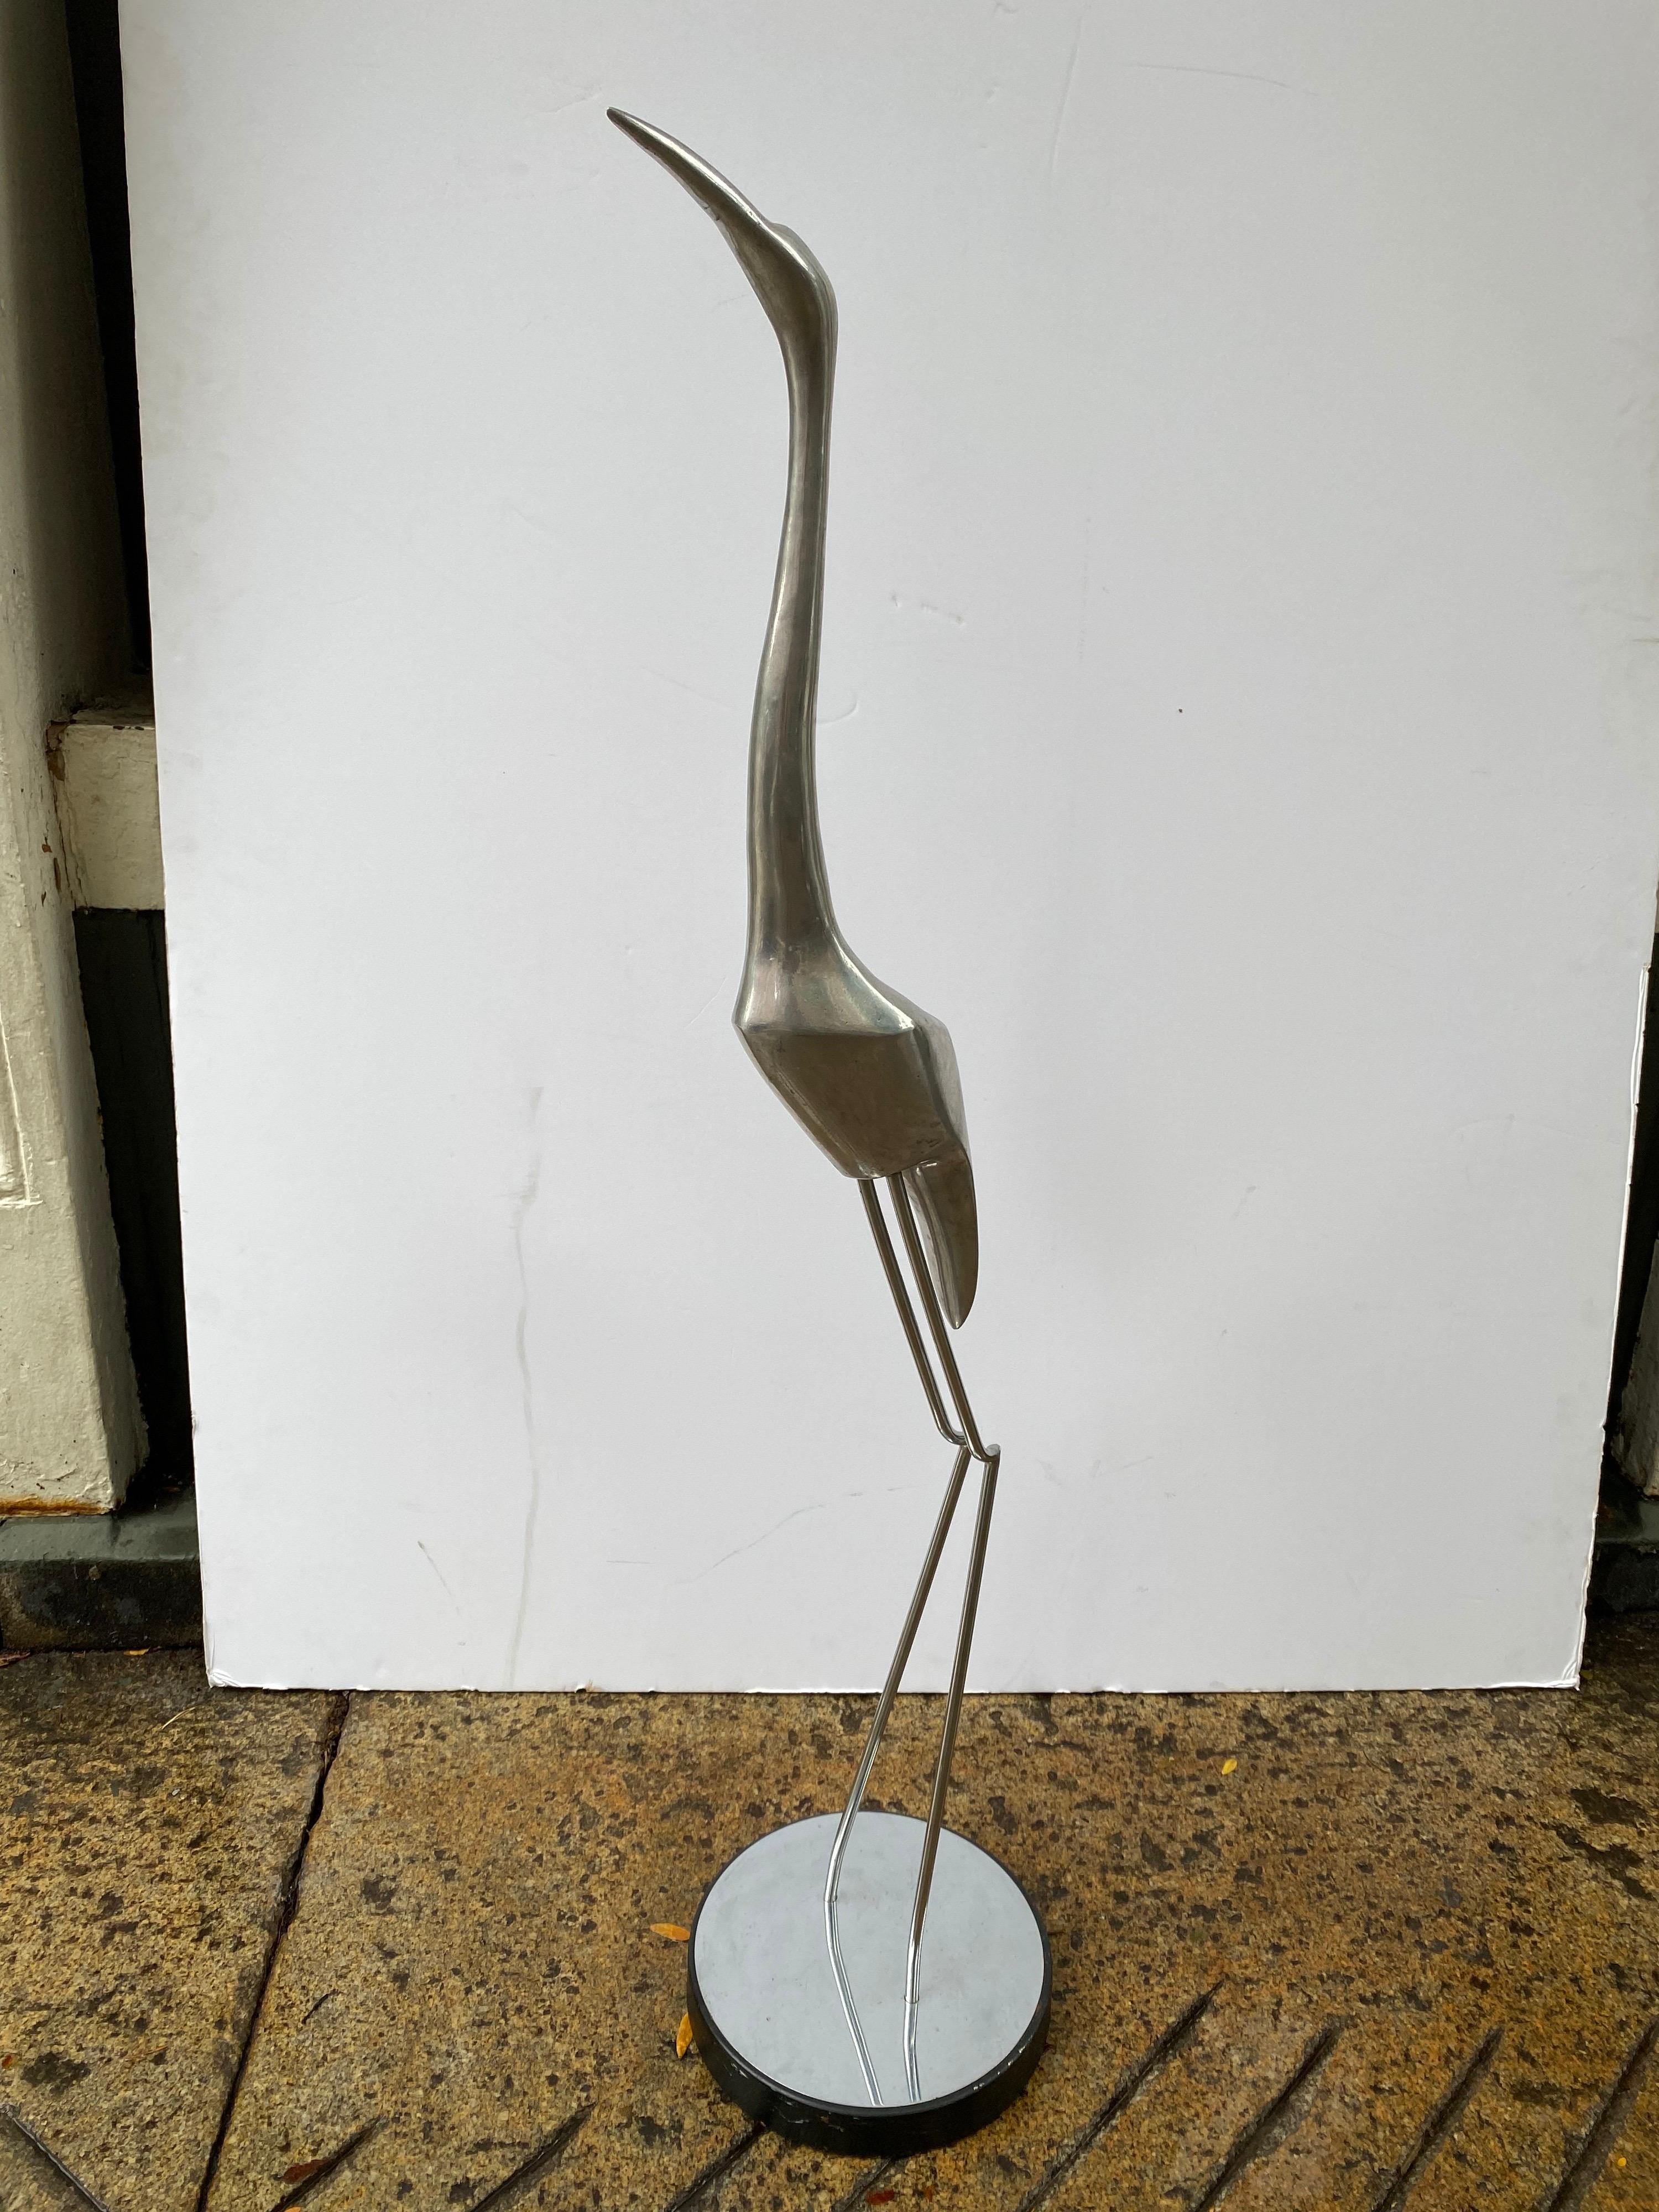 Jere' aluminum free standing heron. Body is aluminum with a chrome round base. Nice scale and size! Stands at 46